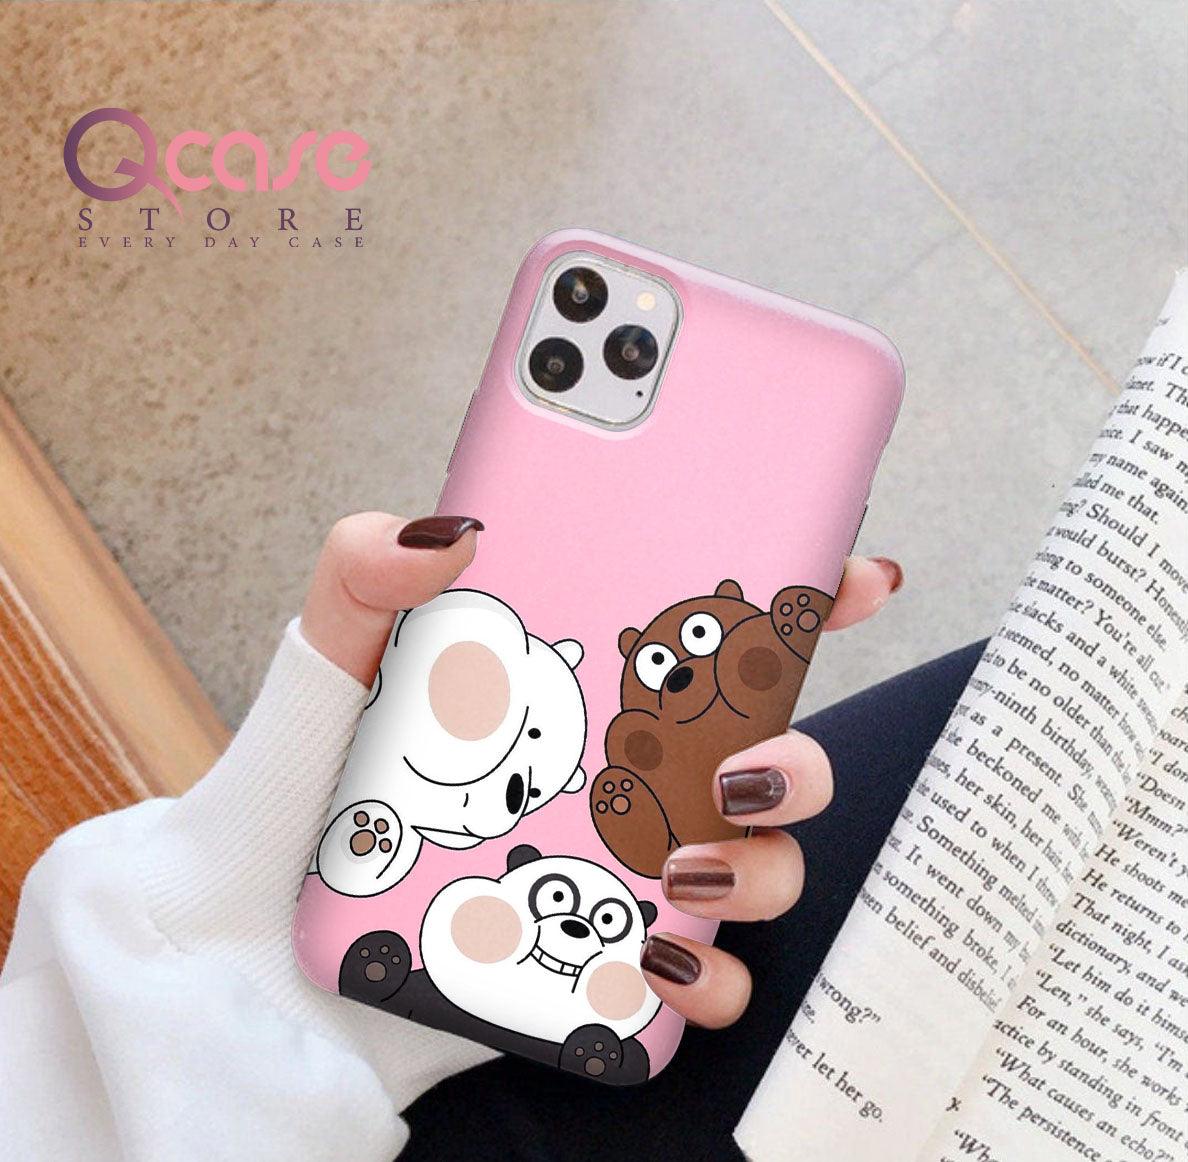 We Bare Bears Phone Cover - Qcase Store | Everyday Case